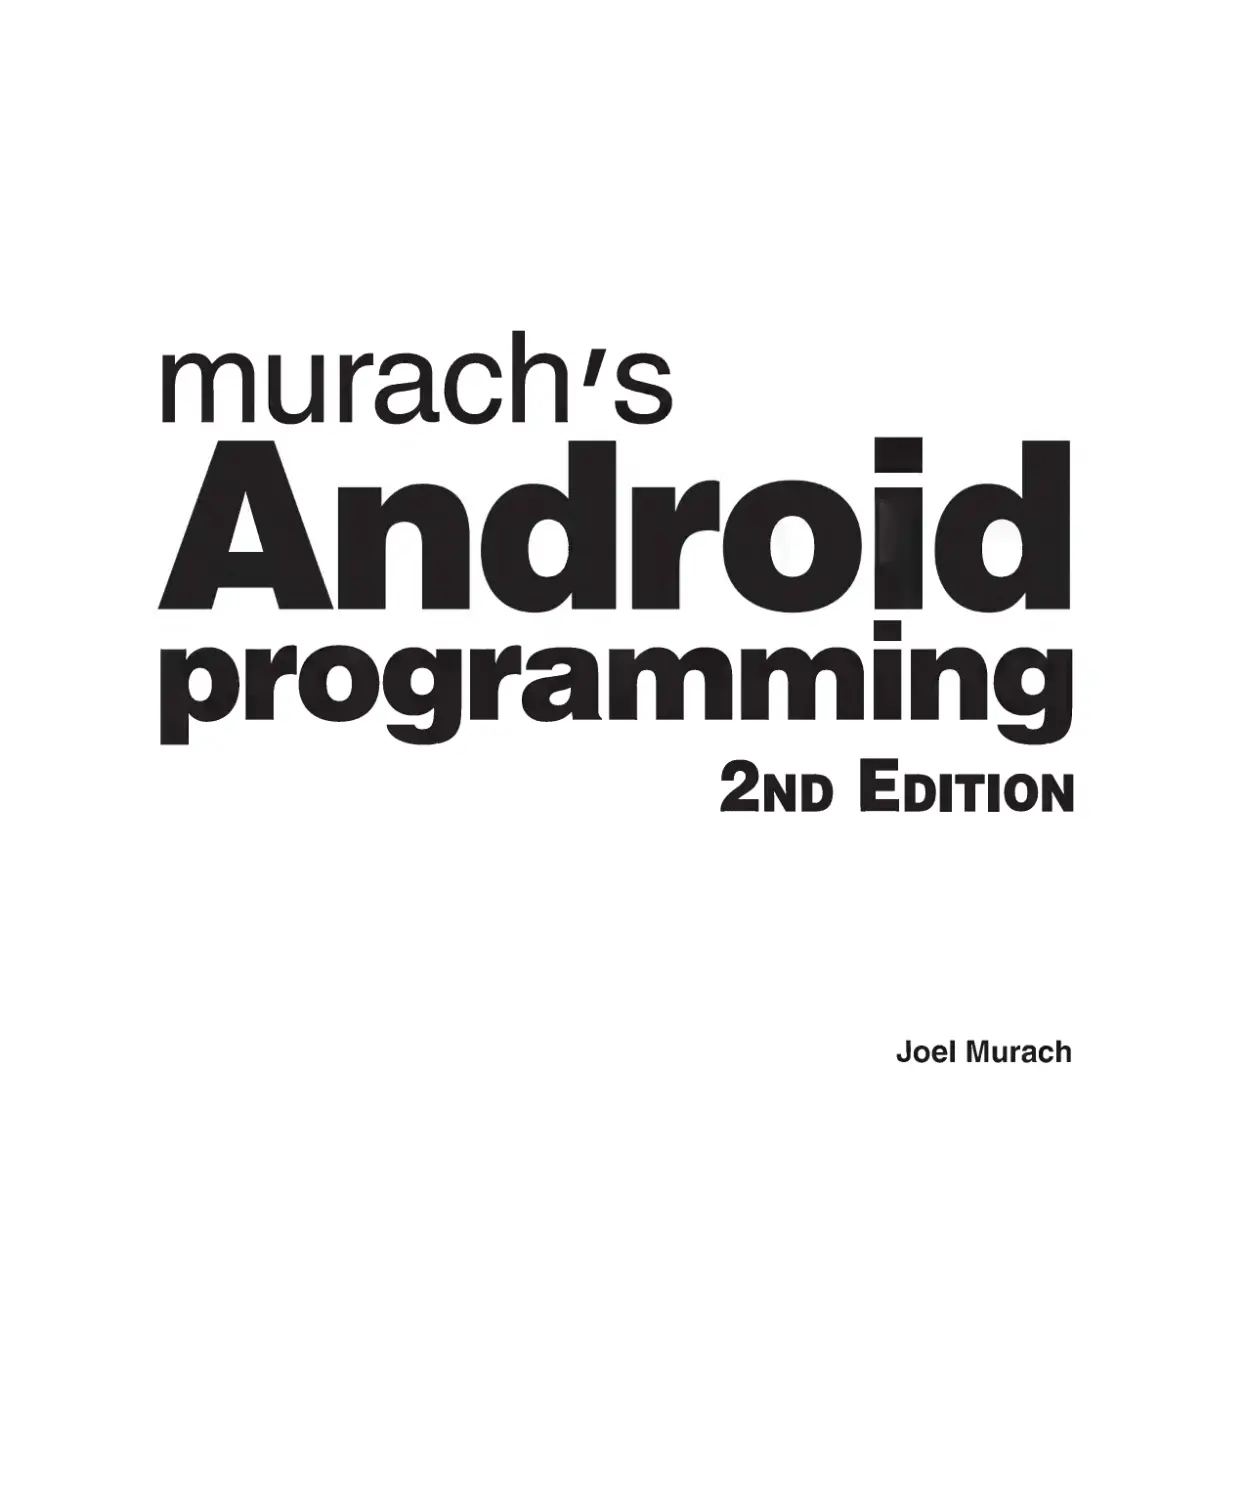 Murach's Android Programming 2nd Edition